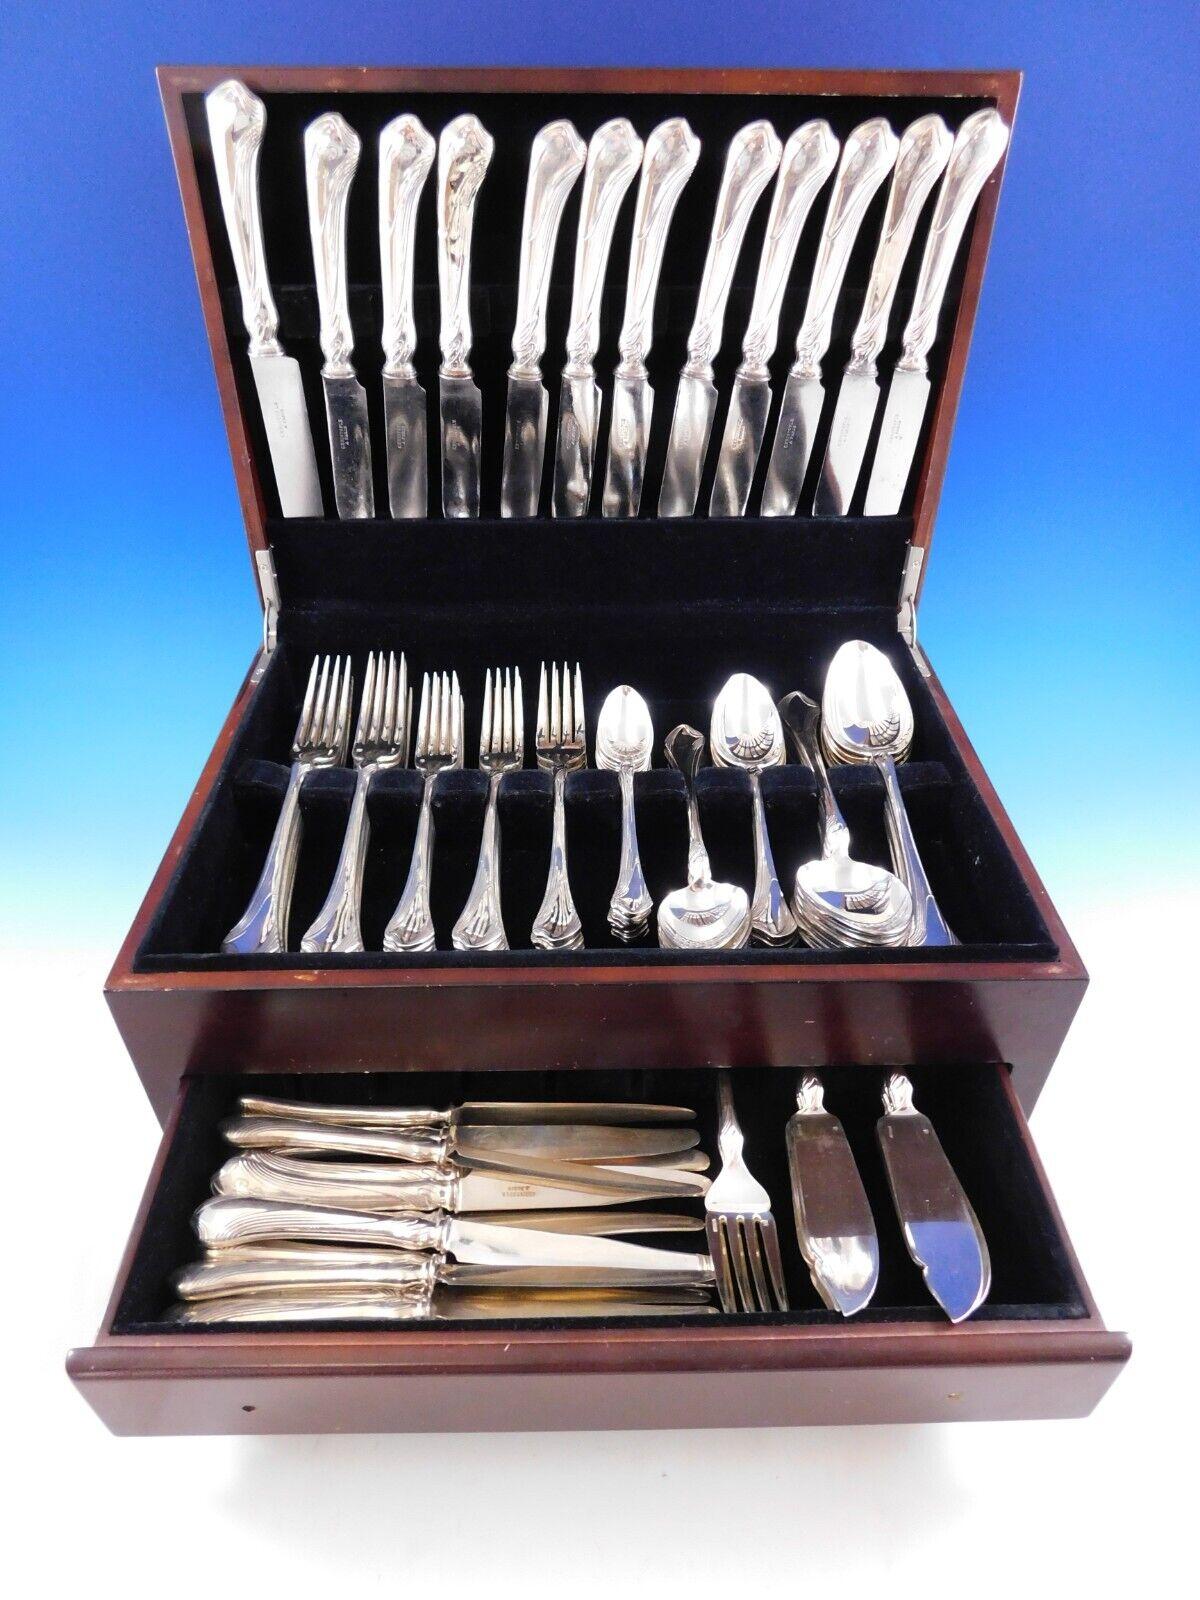 With a dedication to perfection and quality, Christofle flatware creations unite craftsmanship and modern technique, resulting in flatware to be handed down through generations. 

Gorgeous Moderne Gramont by Christofle France estate Silverplate